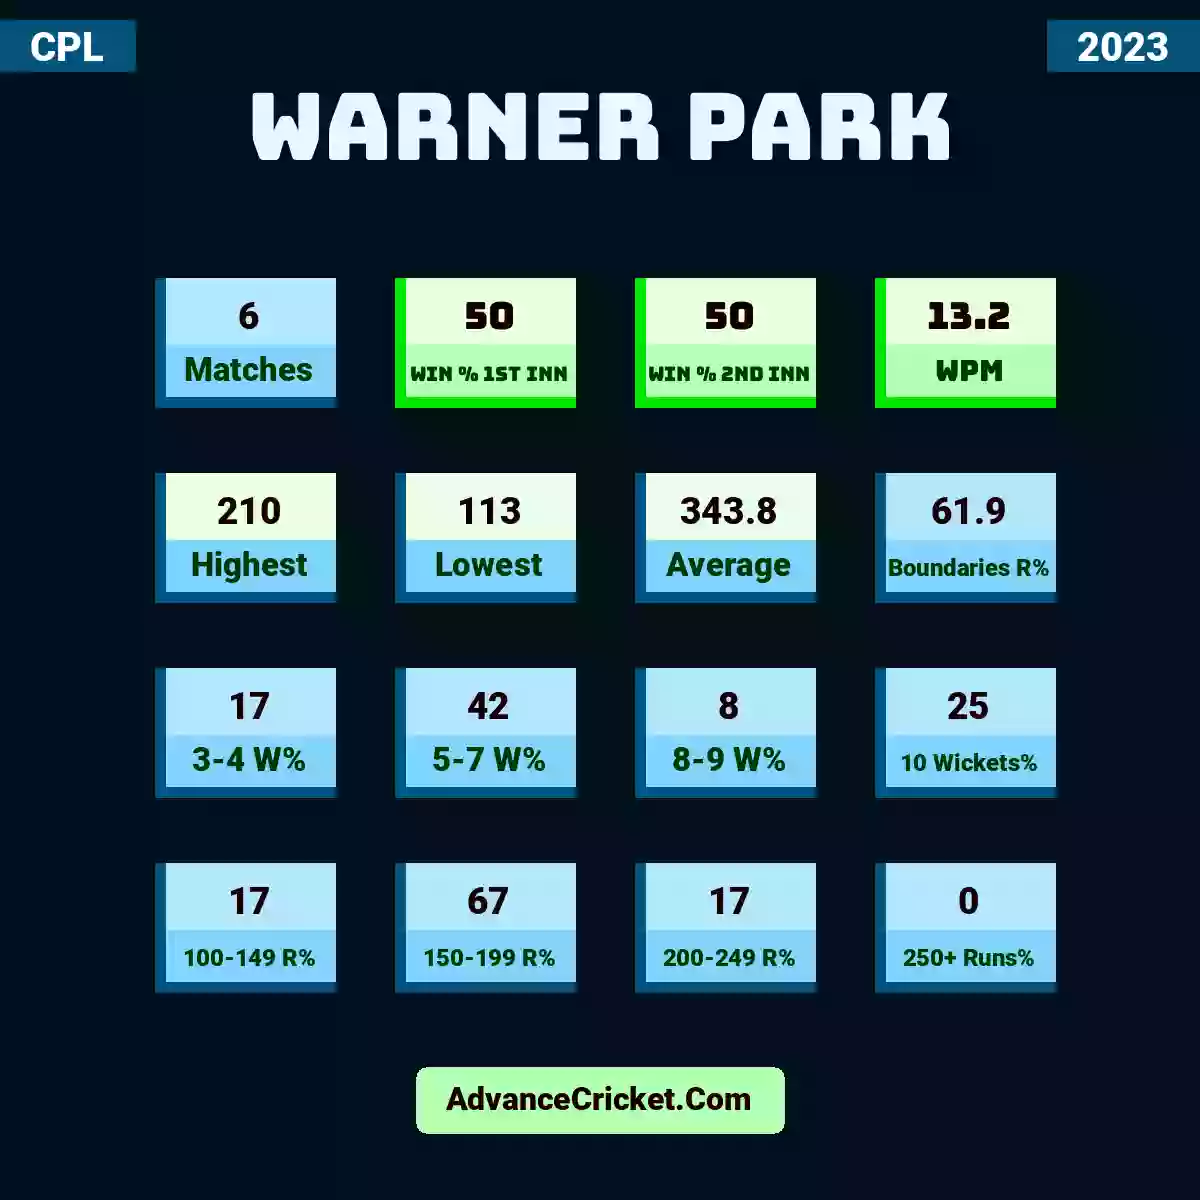 Image showing Warner Park with Matches: 6, Win % 1st Inn: 50, Win % 2nd Inn: 50, WPM: 13.2, Highest: 210, Lowest: 113, Average: 343.8, Boundaries R%: 61.9, 3-4 W%: 17, 5-7 W%: 42, 8-9 W%: 8, 10 Wickets%: 25, 100-149 R%: 17, 150-199 R%: 67, 200-249 R%: 17, 250+ Runs%: 0.